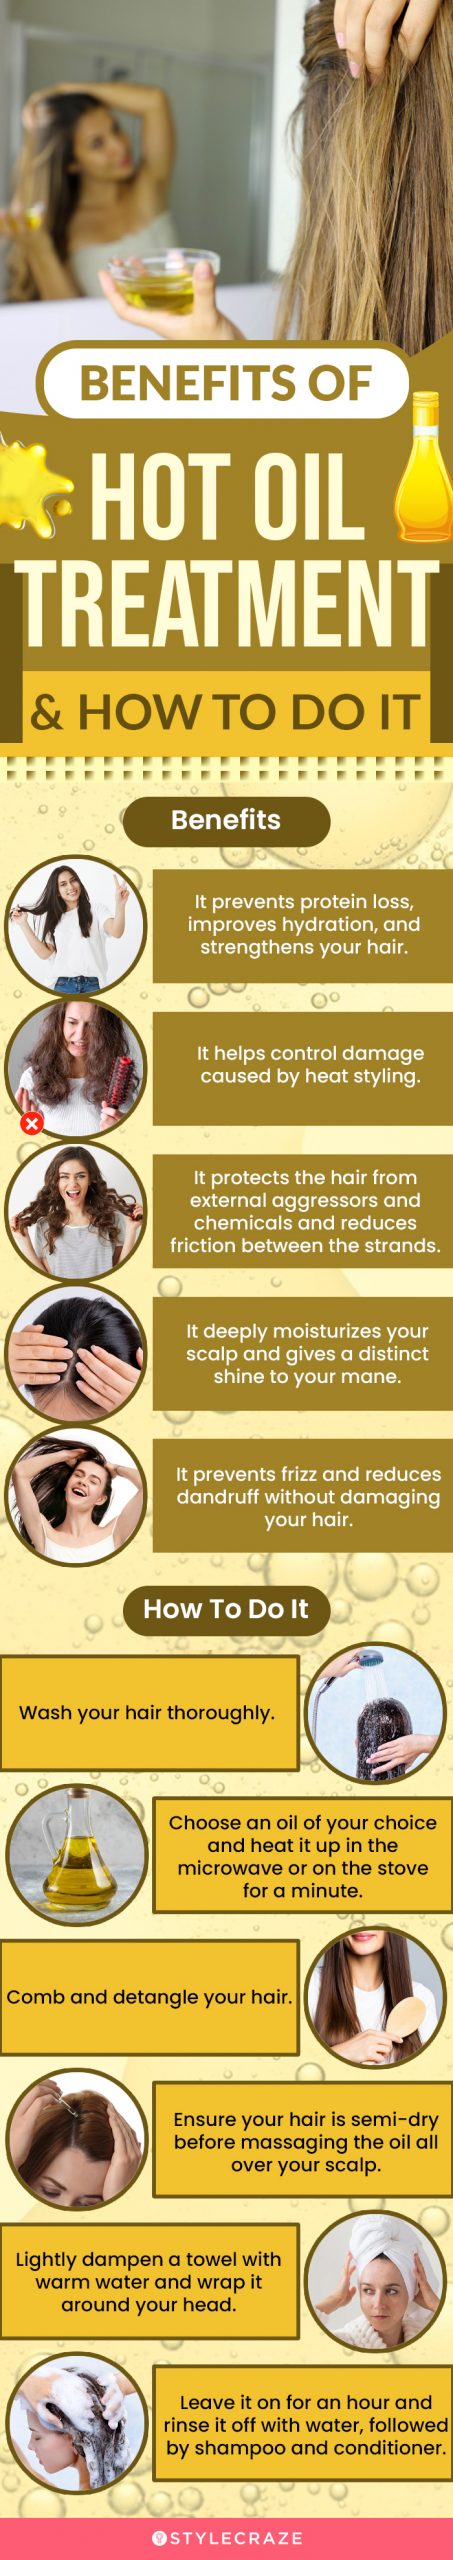 hot oil treatment for hair benefits and how to do it (infographic)